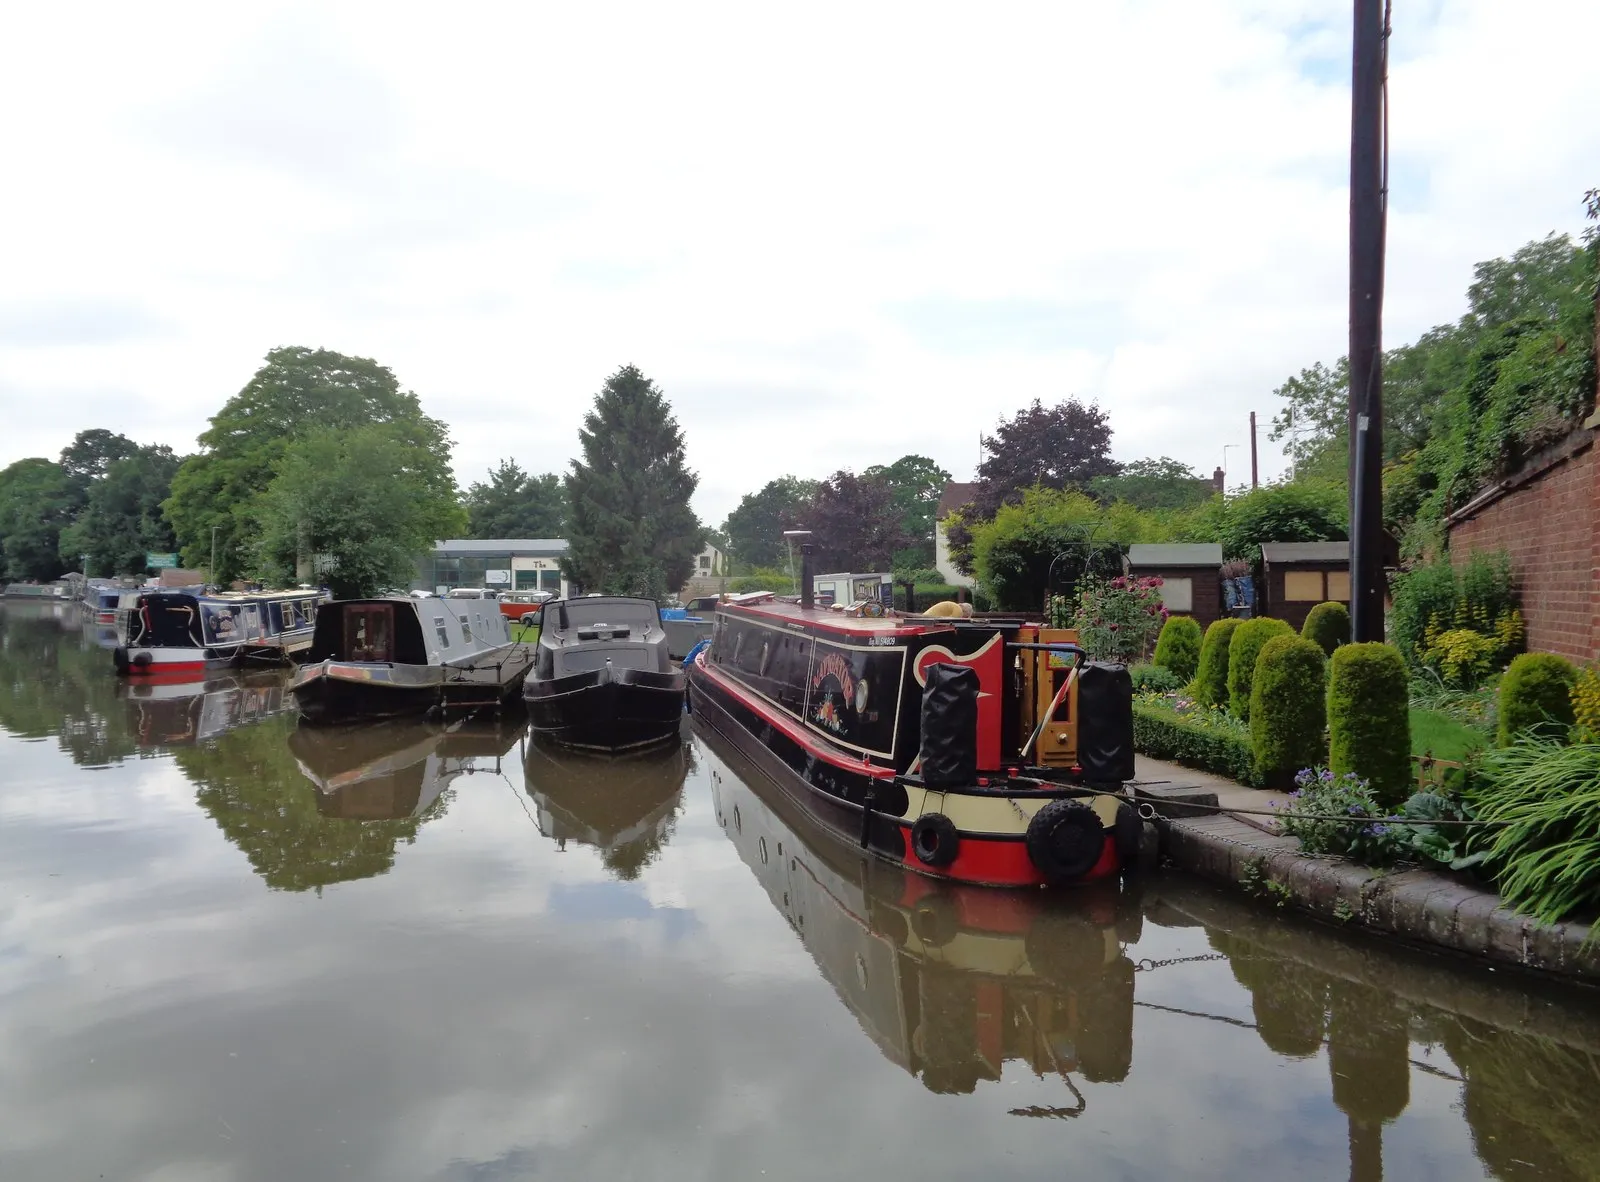 Photo showing: Boats at Hanbury Wharf, Droitwich